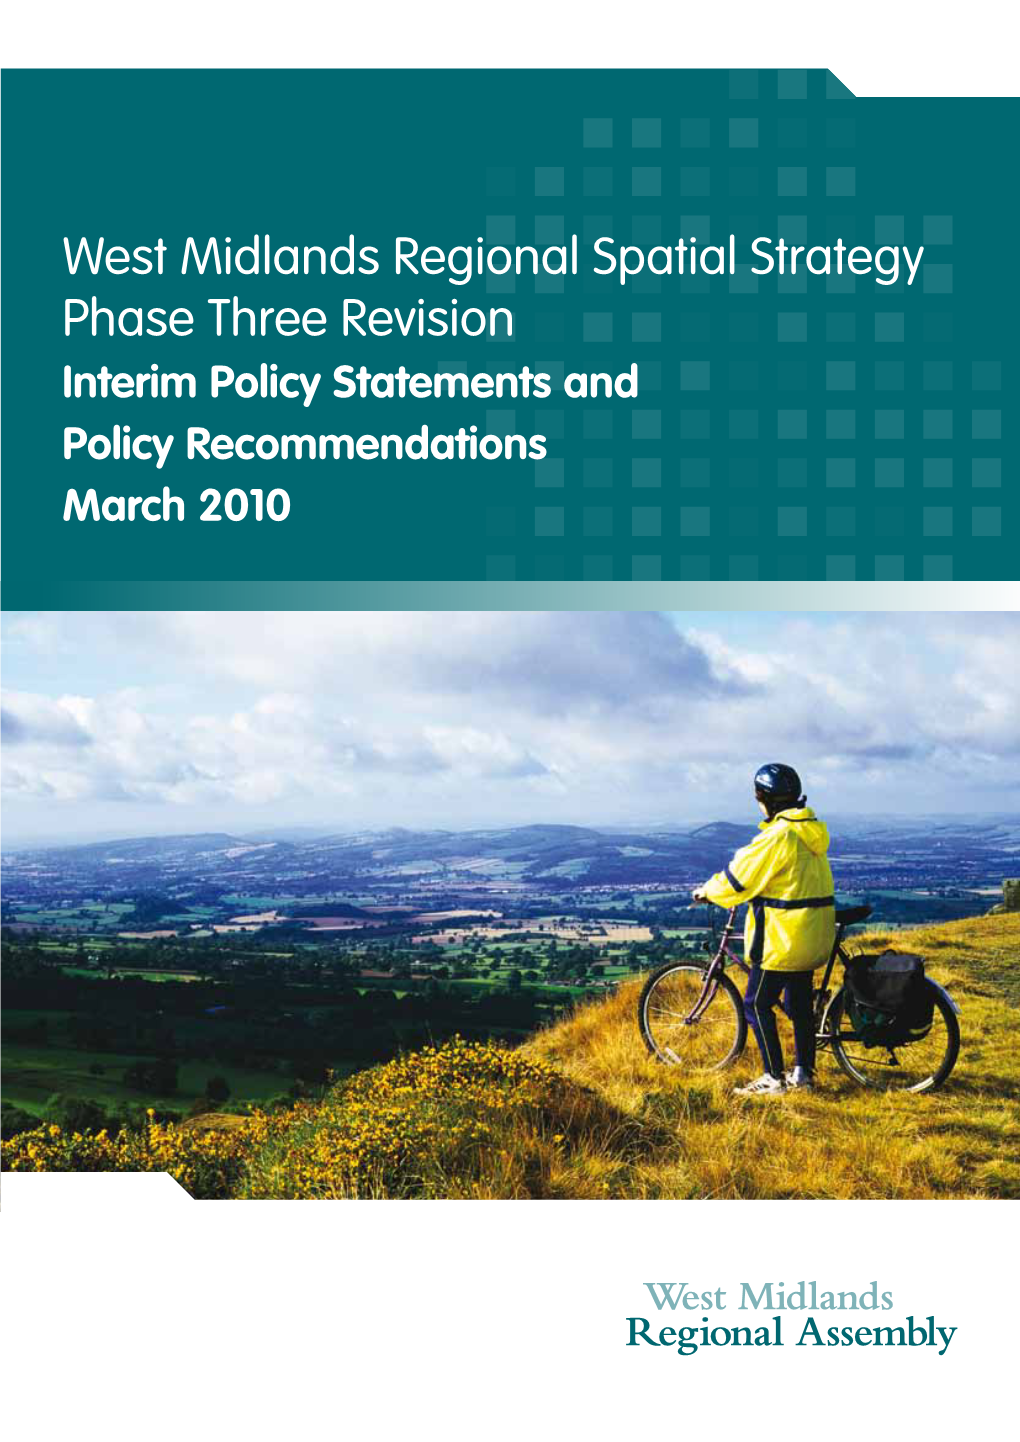 West Midlands Regional Spatial Strategy Phase Three Revision Interim Policy Statements and Policy Recommendations March 2010 Contents